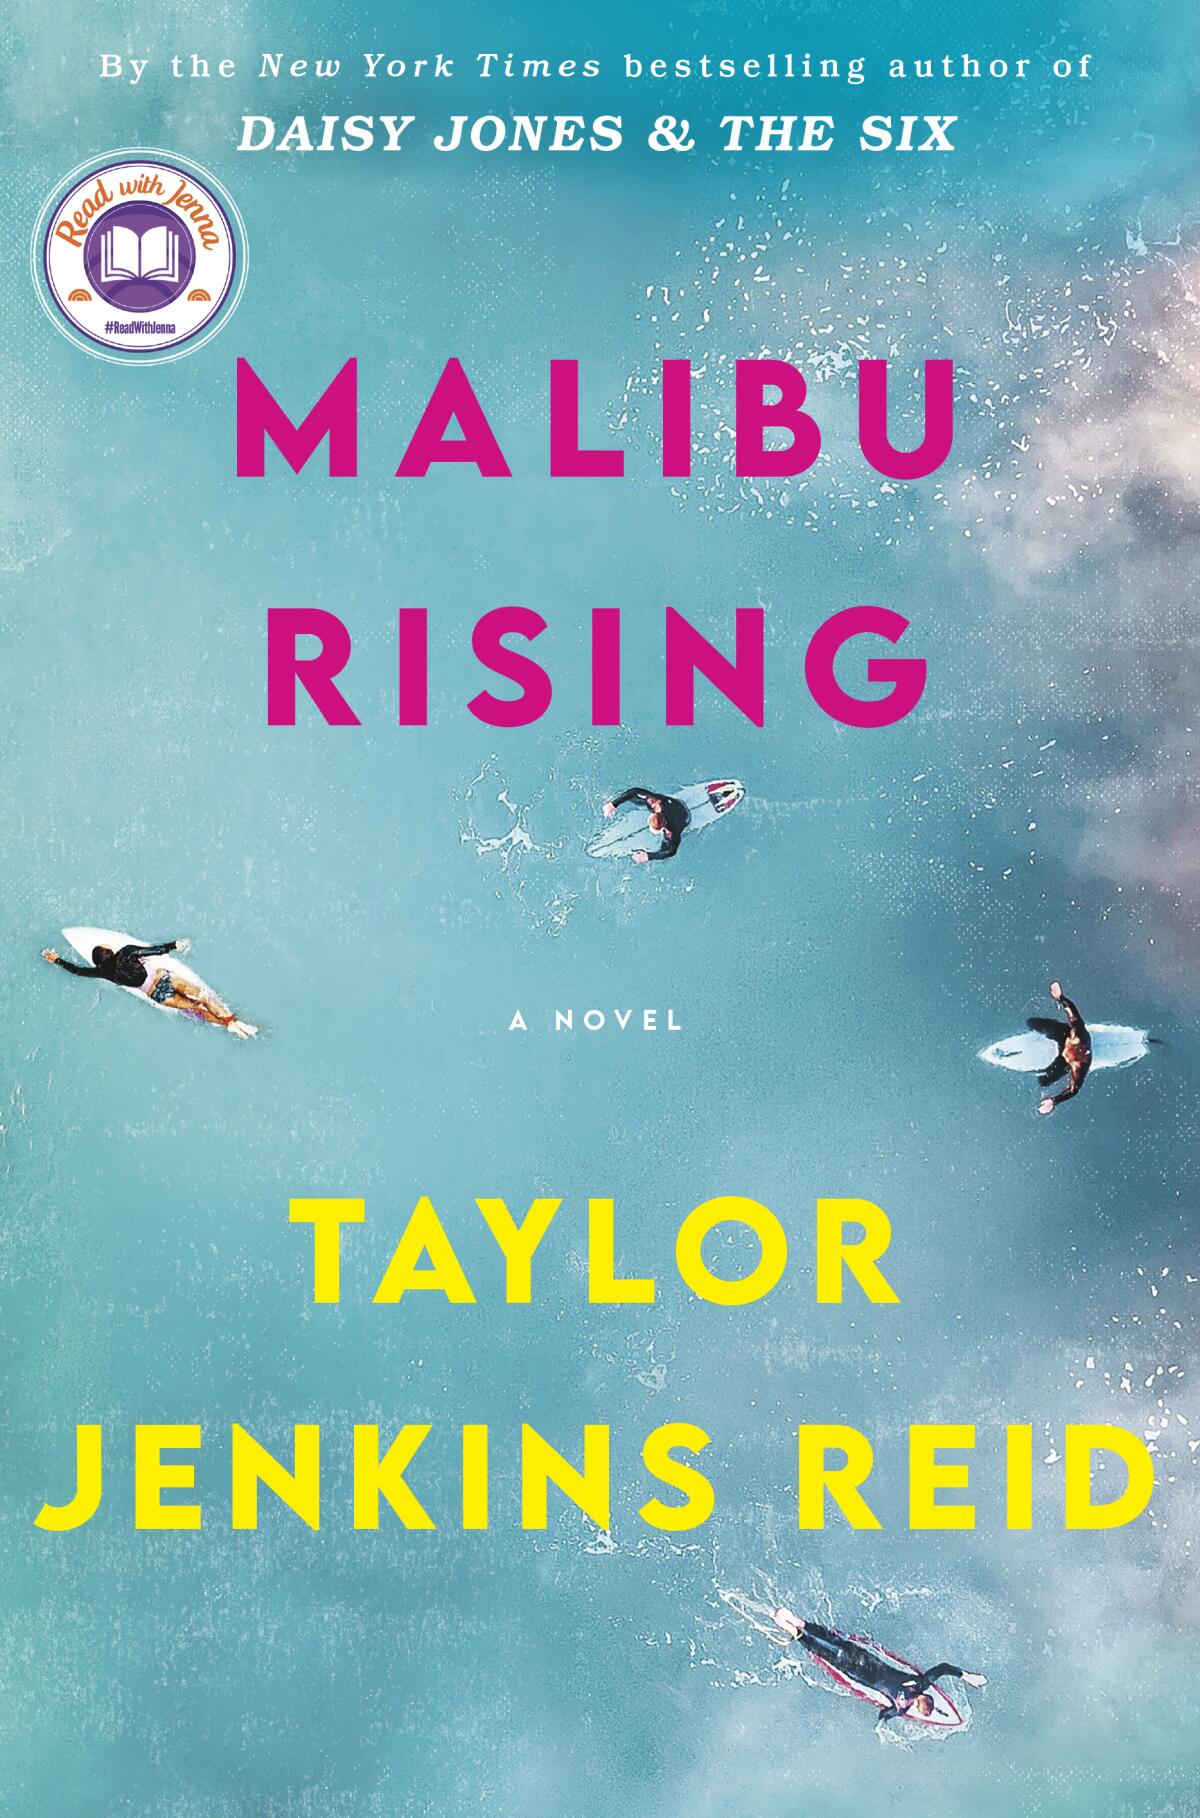 The cover of the book "Malibu Rising" by Taylor Jenkins Reid